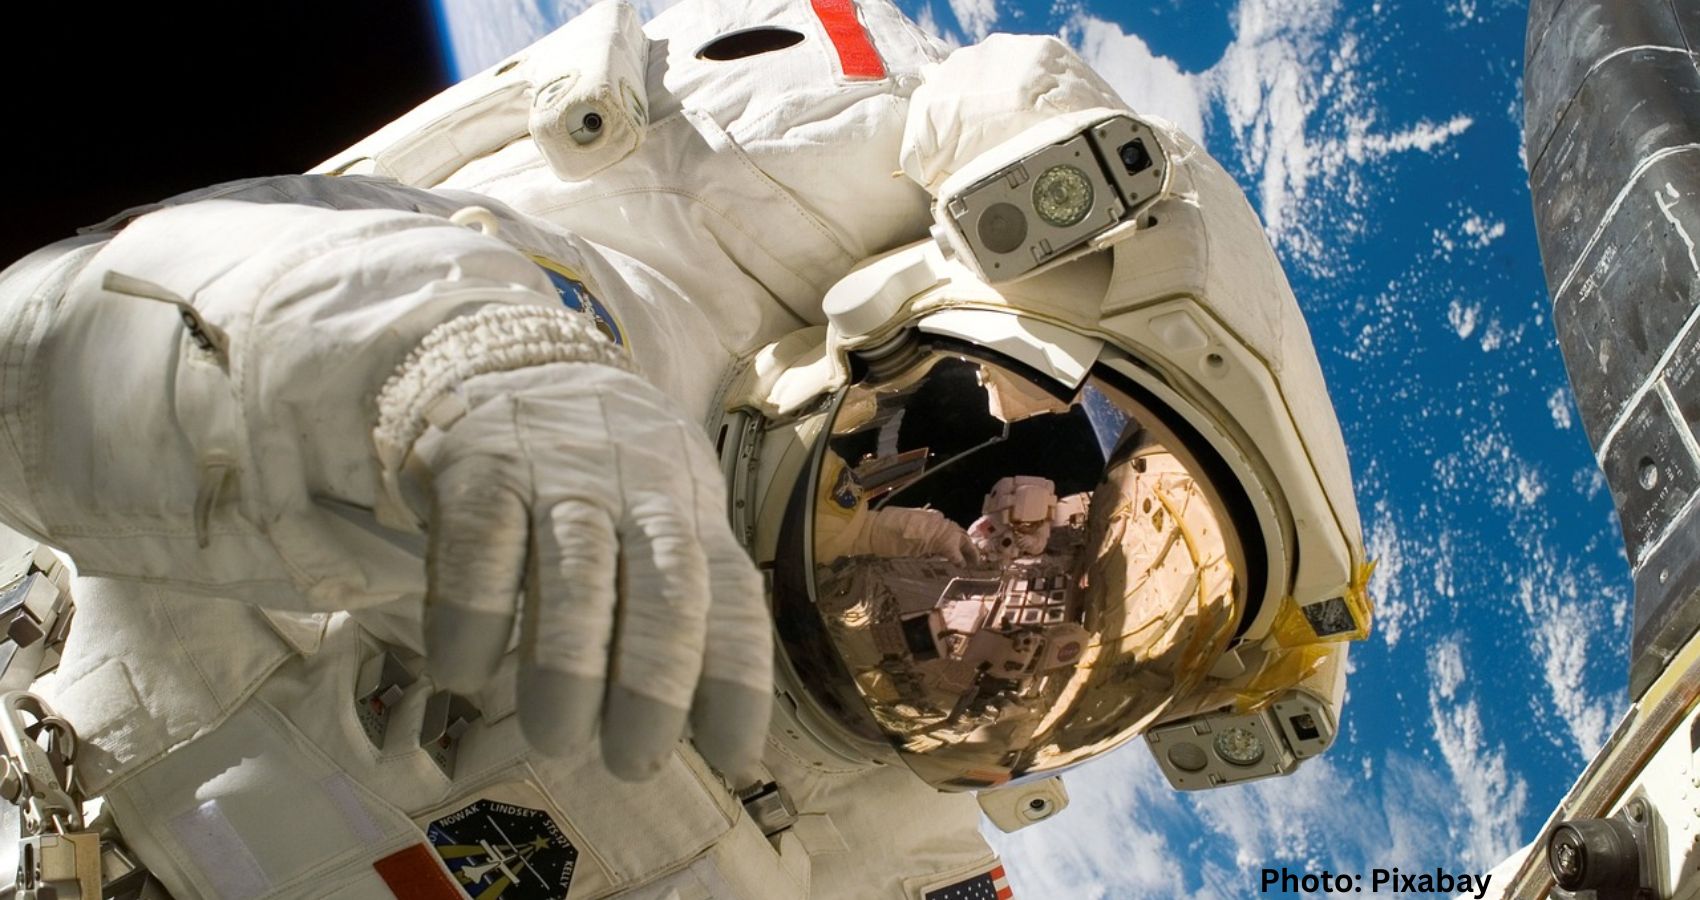 Feature and Cover Superbug Strain Discovered in ISS Raises Concerns for Astronaut Health